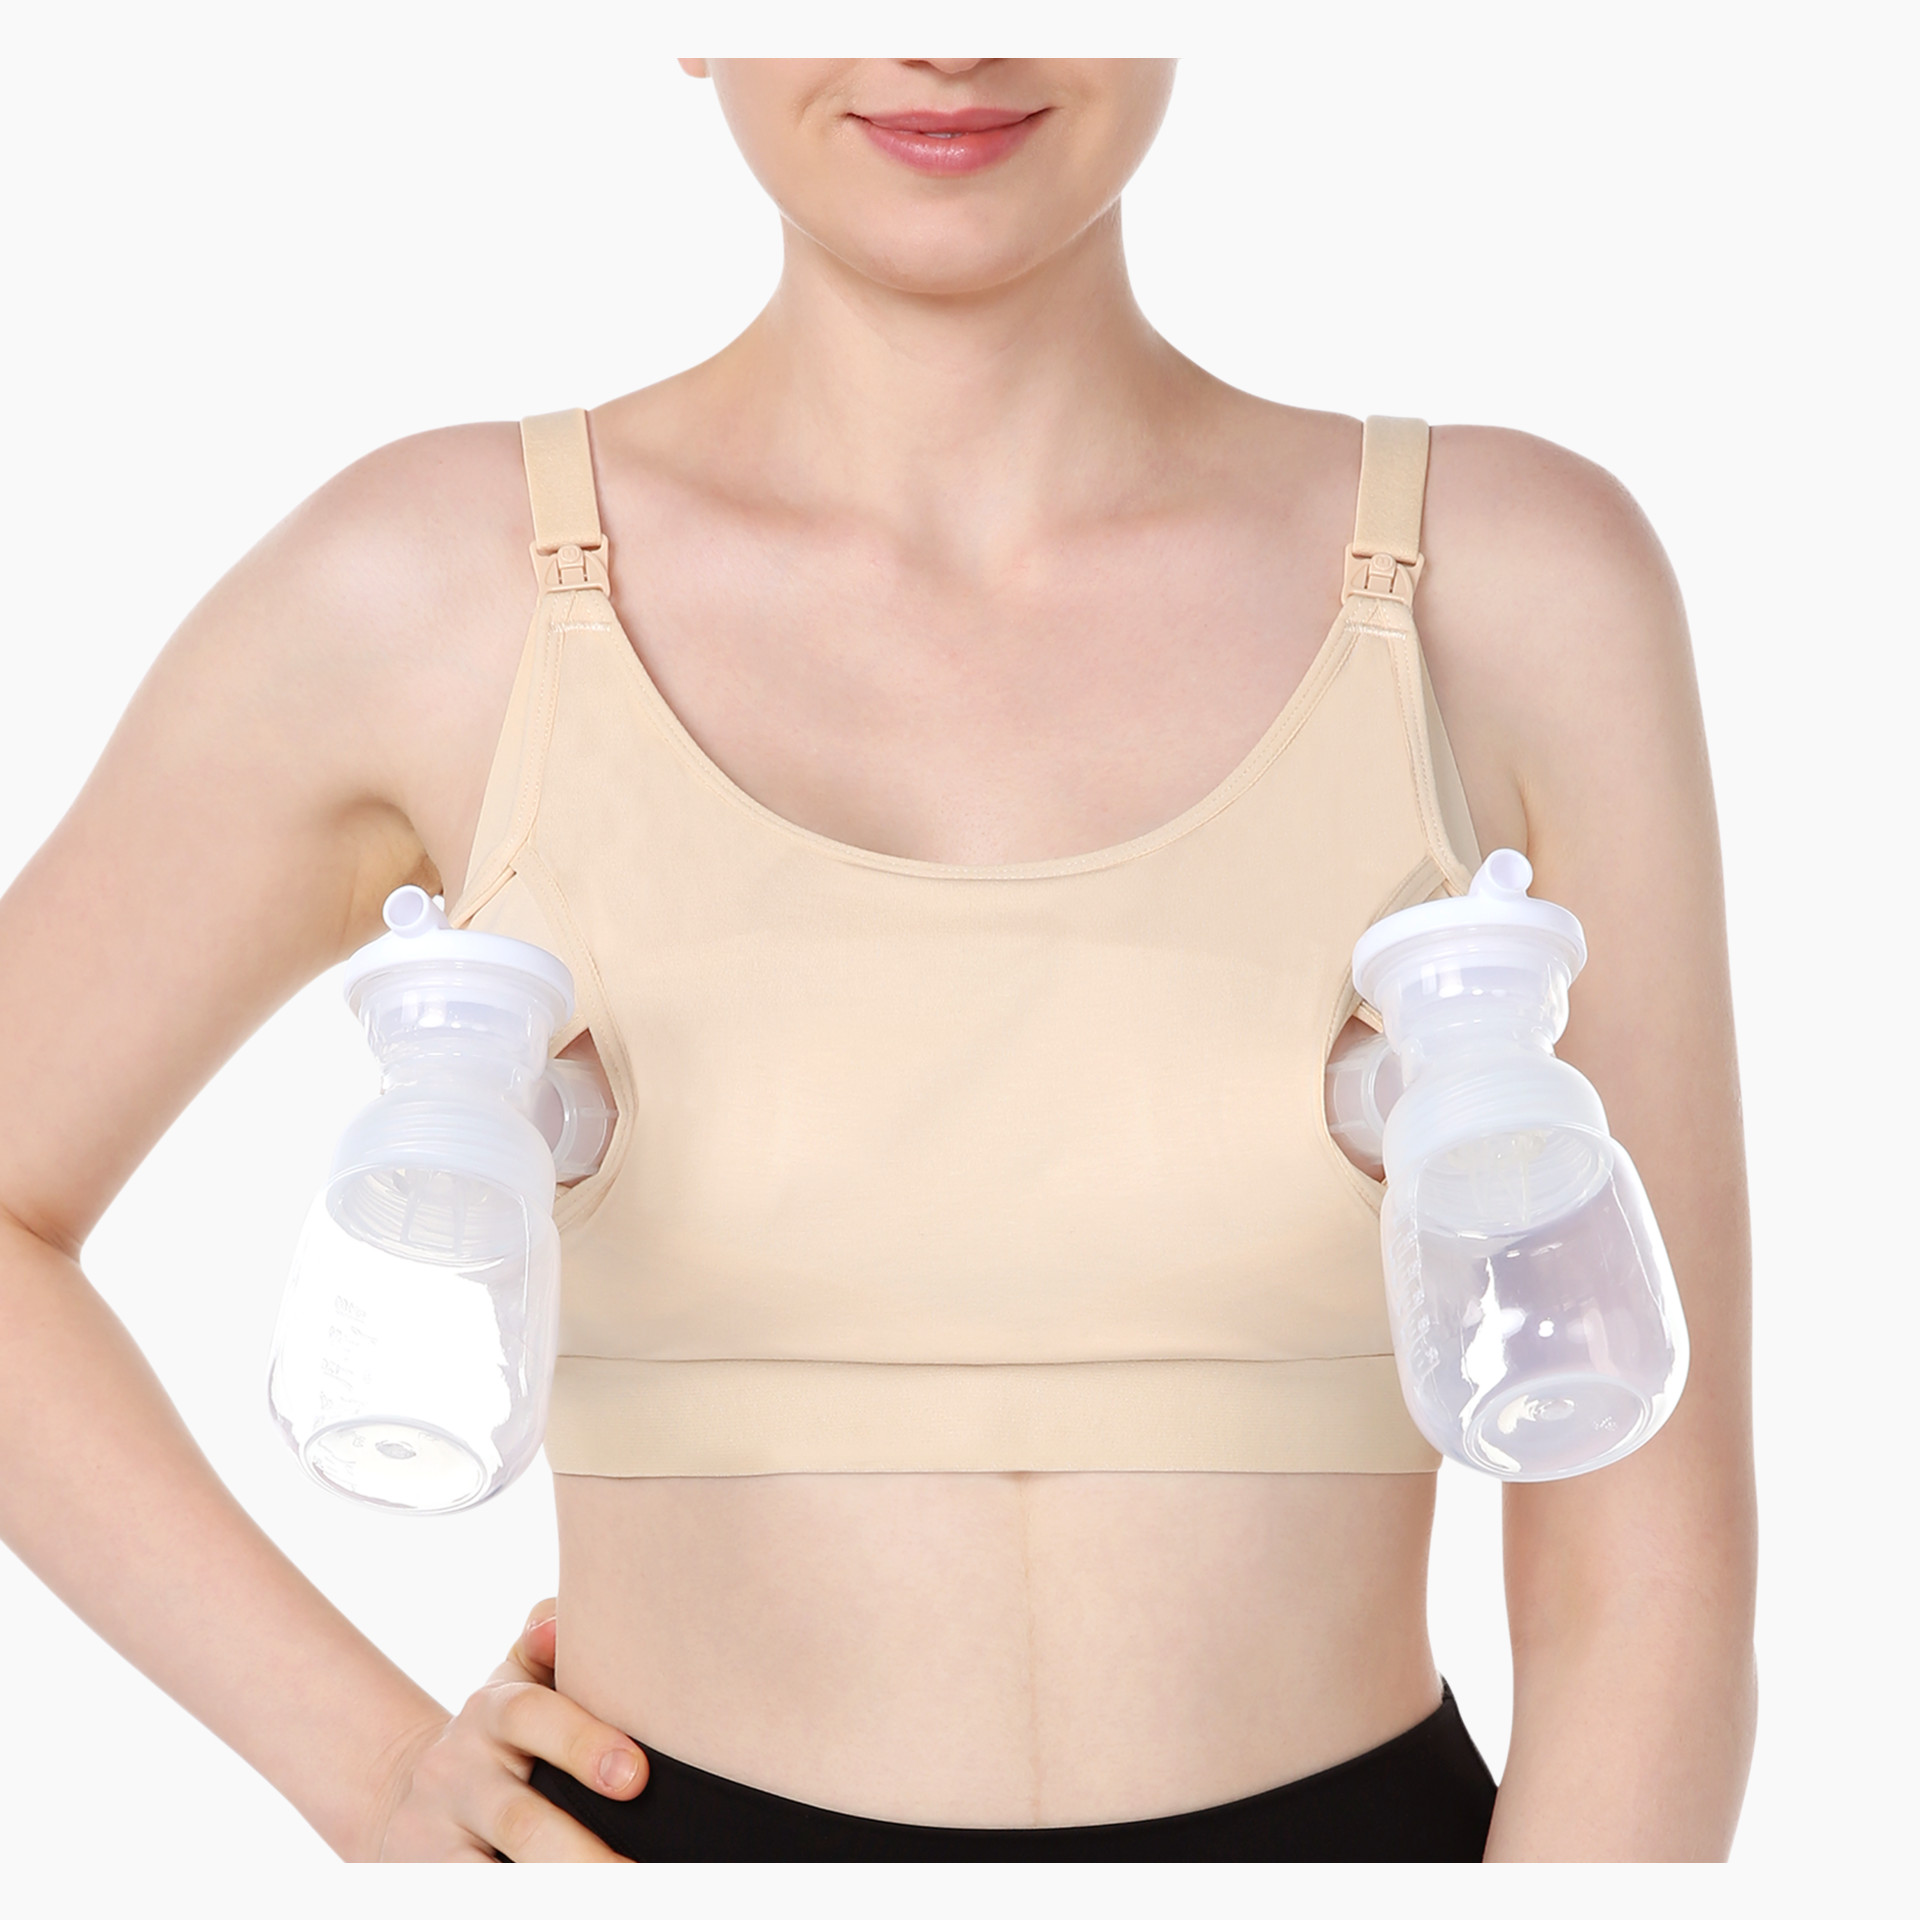 Hands Free Pumping Bra, Adjustable Breast-pumps Holding And Nursing Bra,  Suitable For Breastfeeding-pumps By